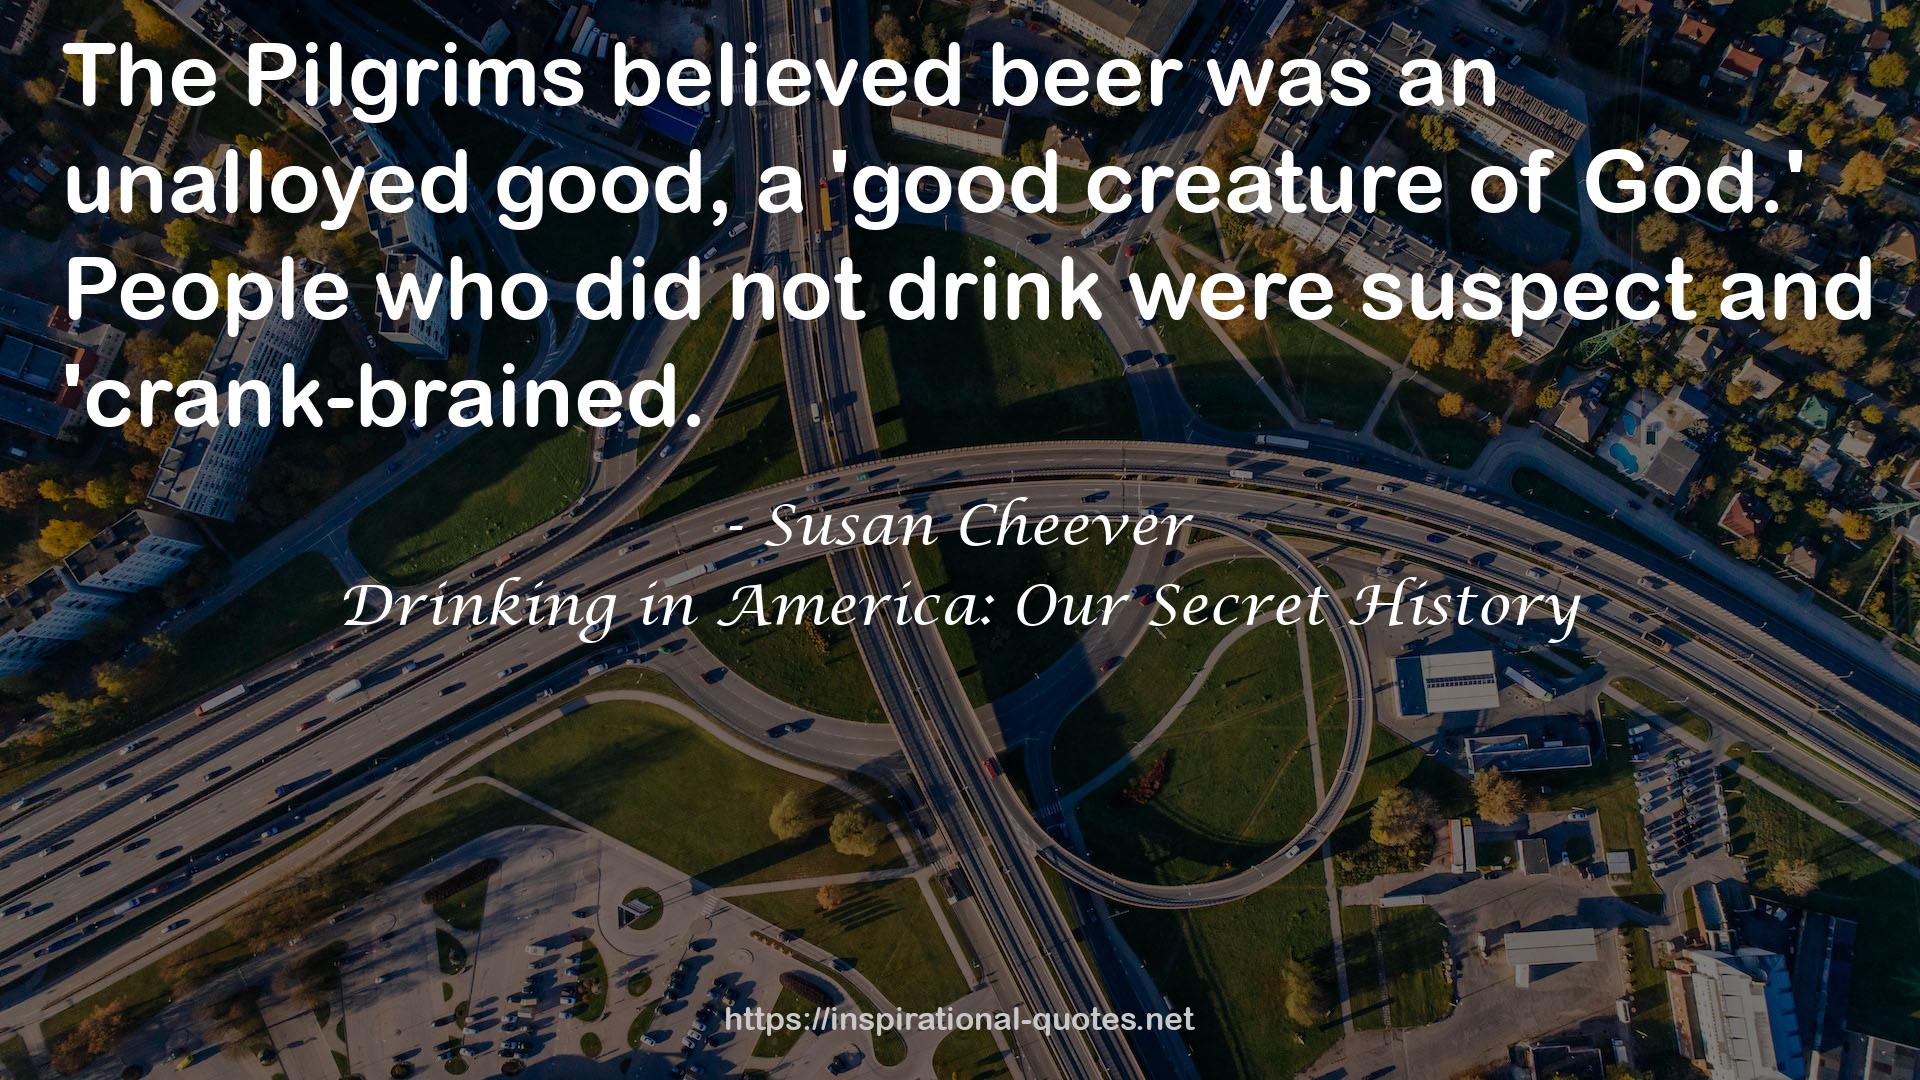 Susan Cheever QUOTES